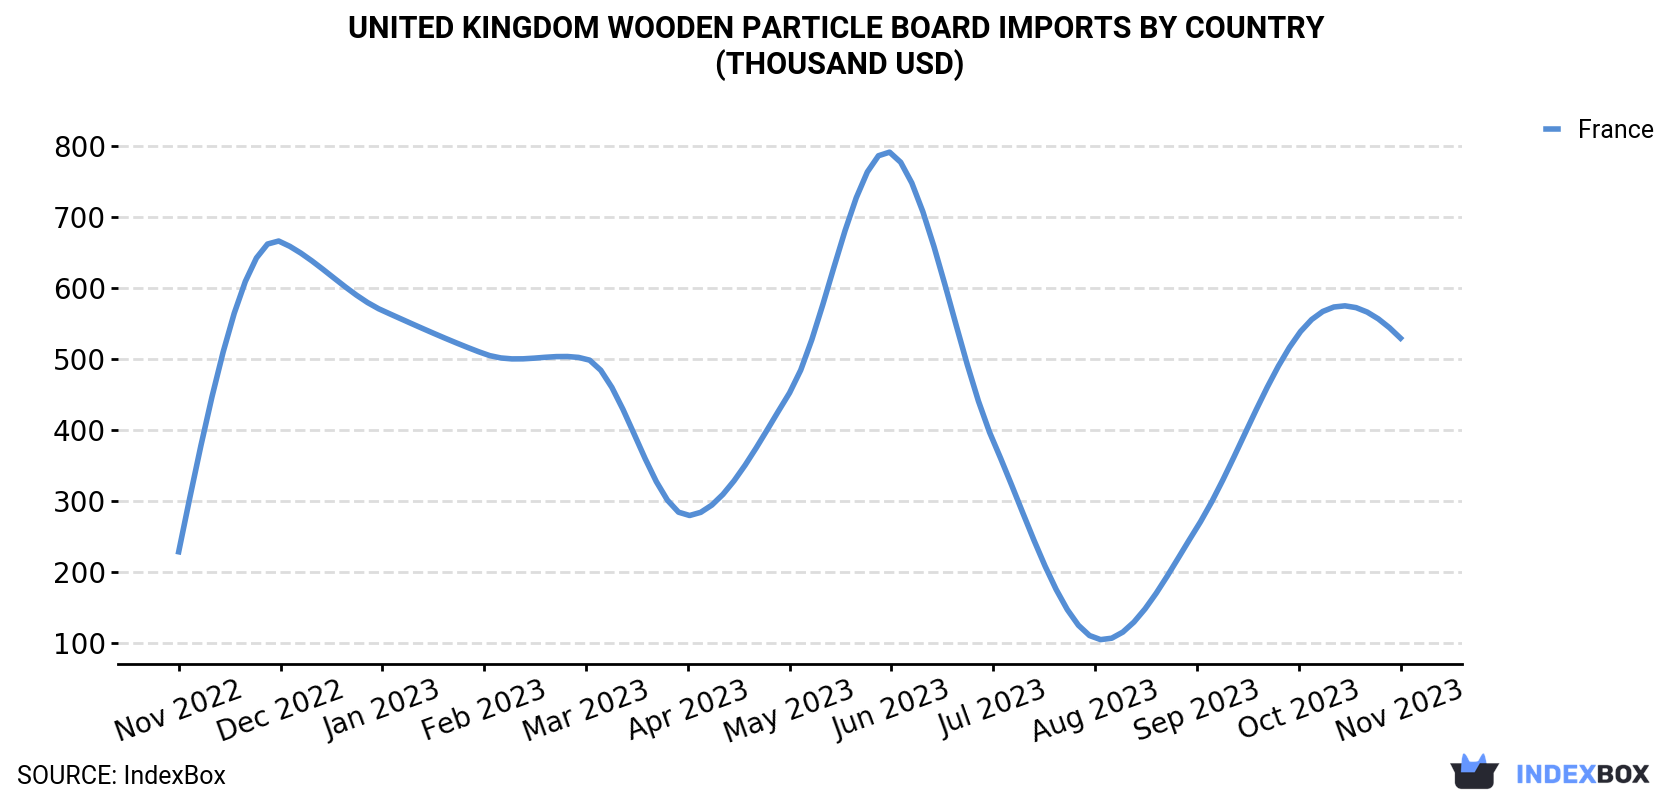 United Kingdom Wooden Particle Board Imports By Country (Thousand USD)